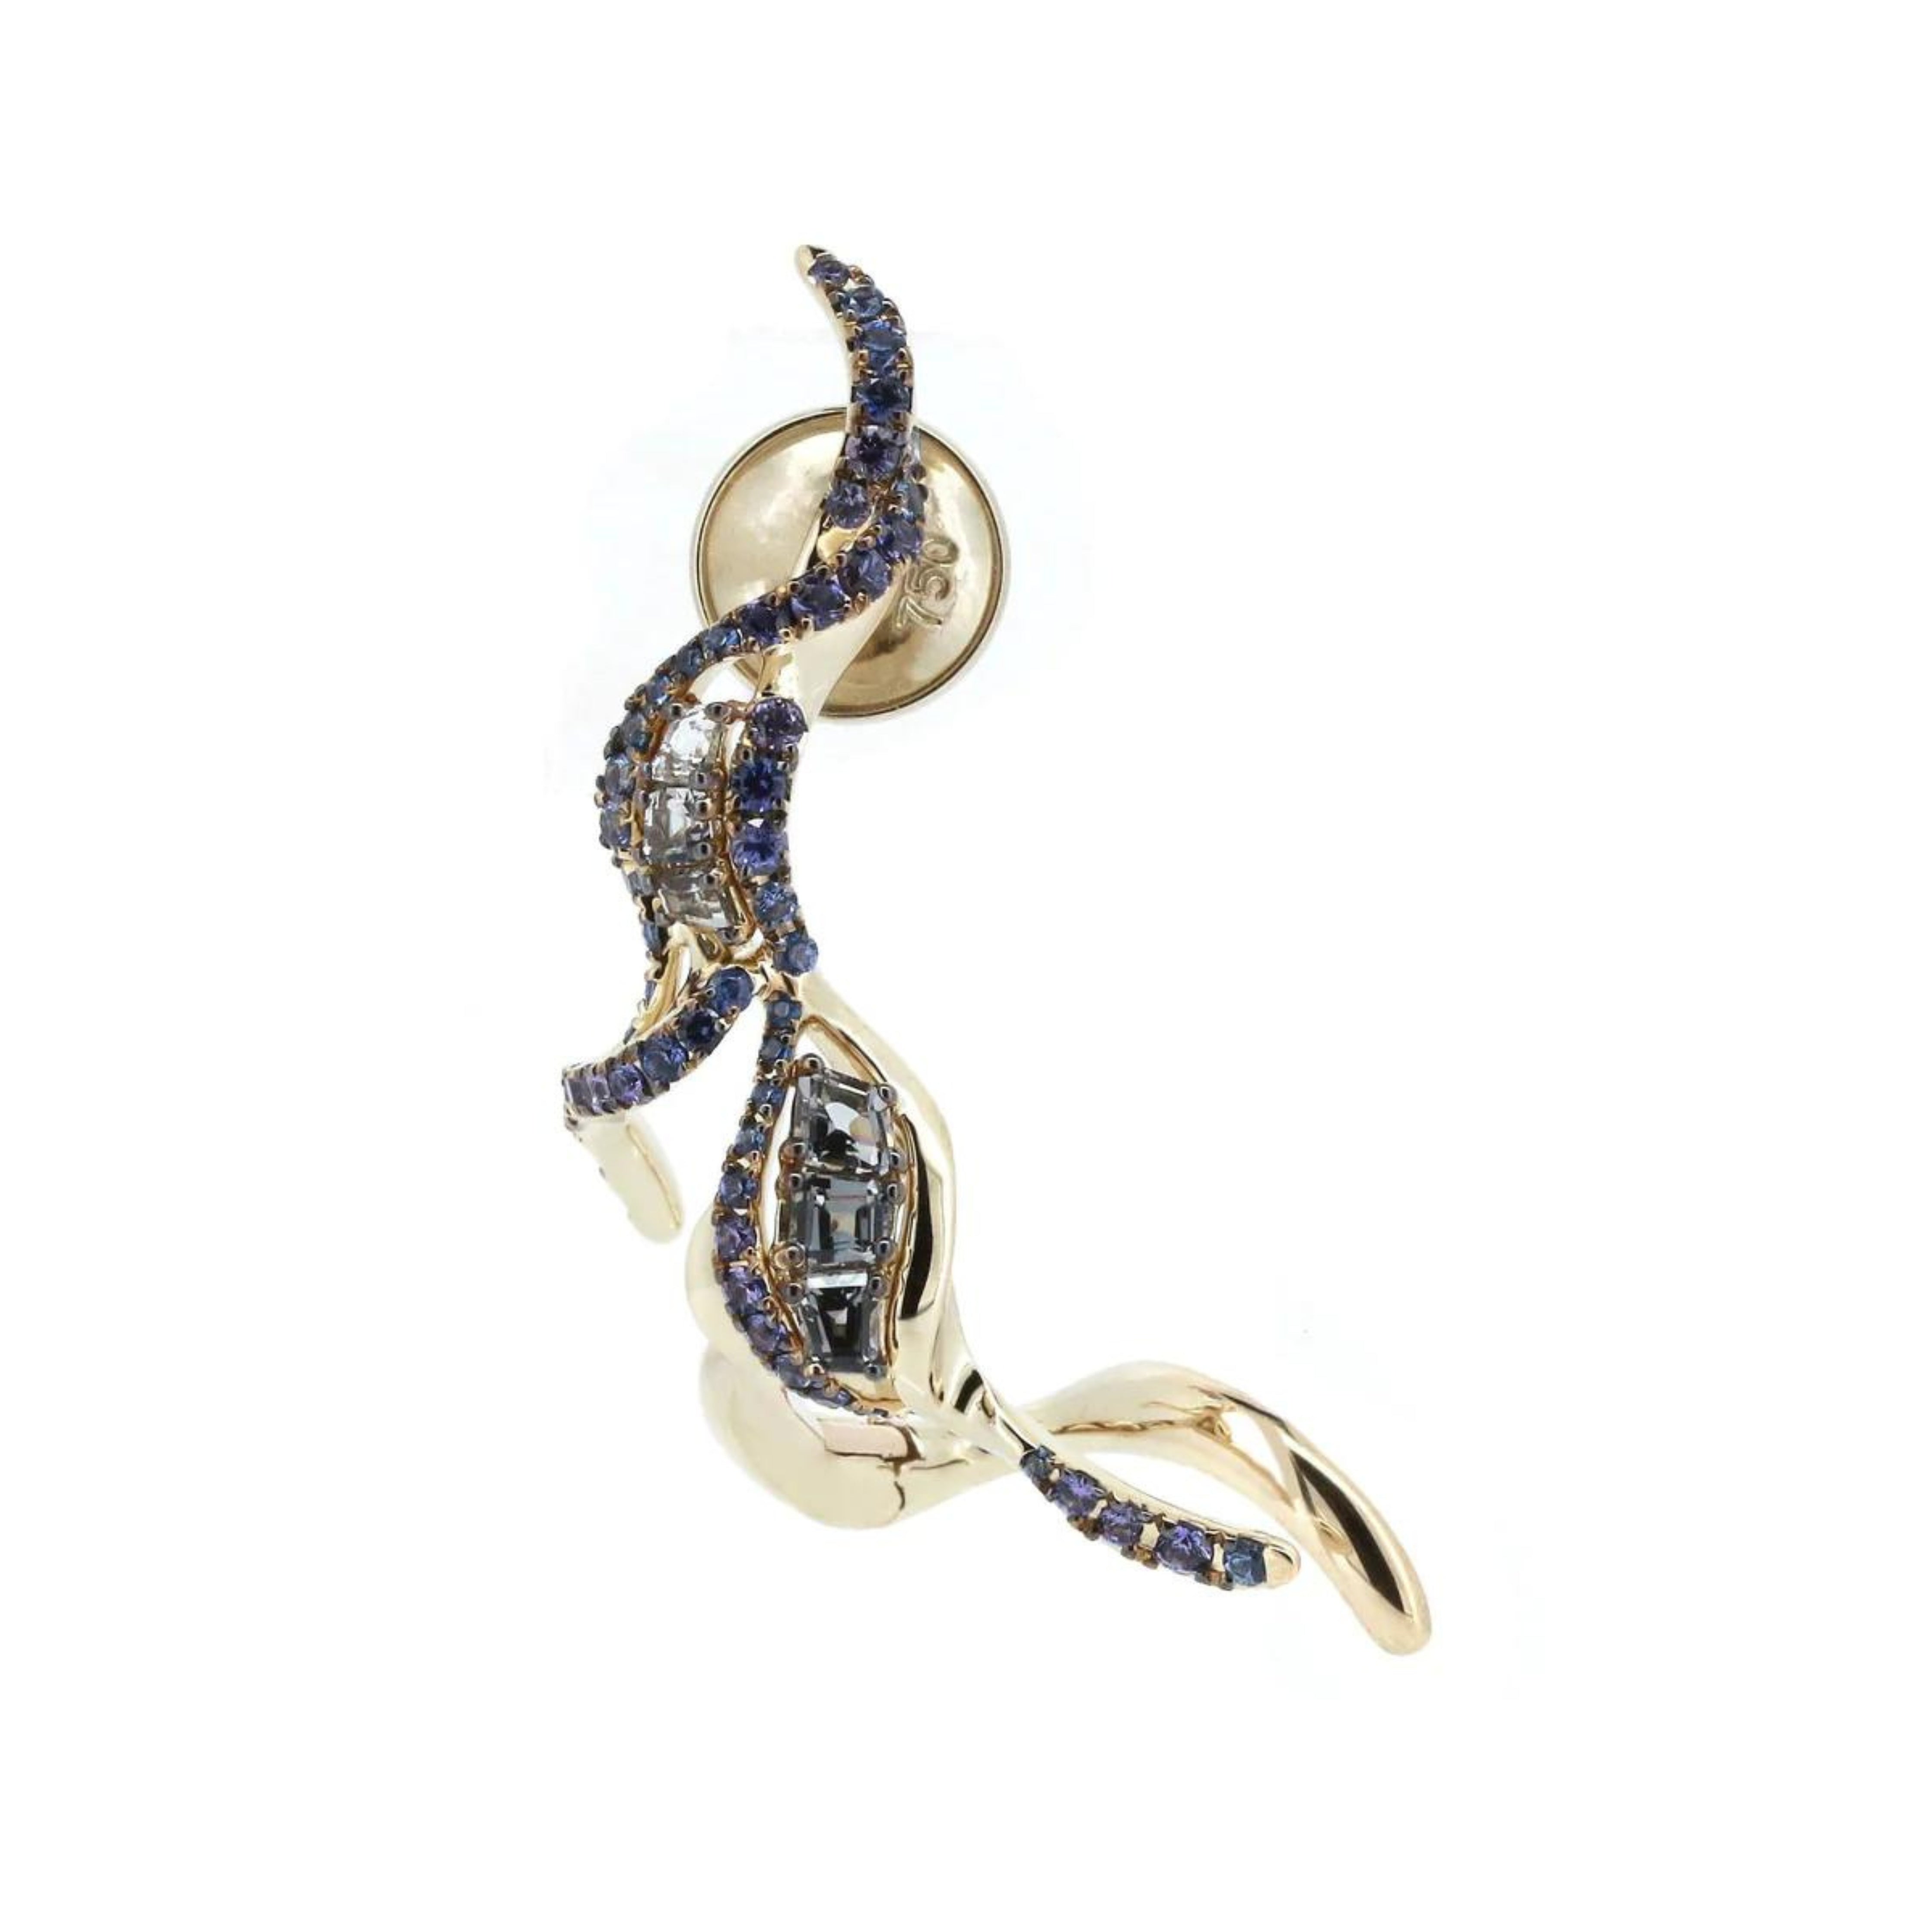 Bibi van der Velden Puff Ear Climber in Blue Sapphire. shades of blue and grey sapphires and spinels adorn the Puff Ear Climber's 18k white gold tendrils. Delicately crafted, this climber elegantly pierces the ear lobe and sweeps up the ear's outer edge. Product shown from the front view.